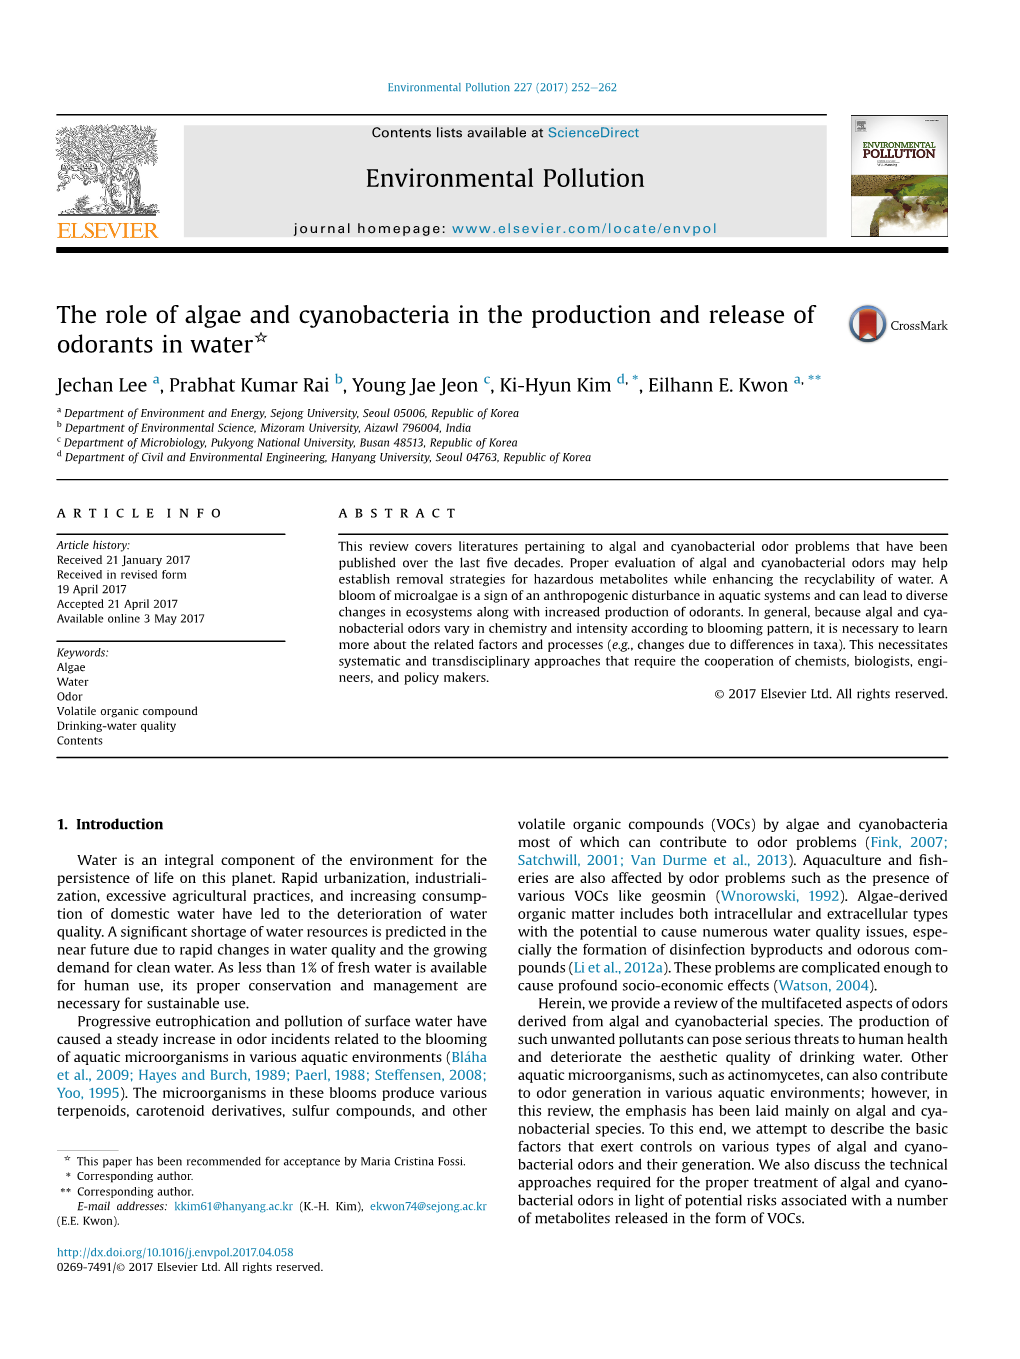 The Role of Algae and Cyanobacteria in the Production and Release of Odorants in Water*